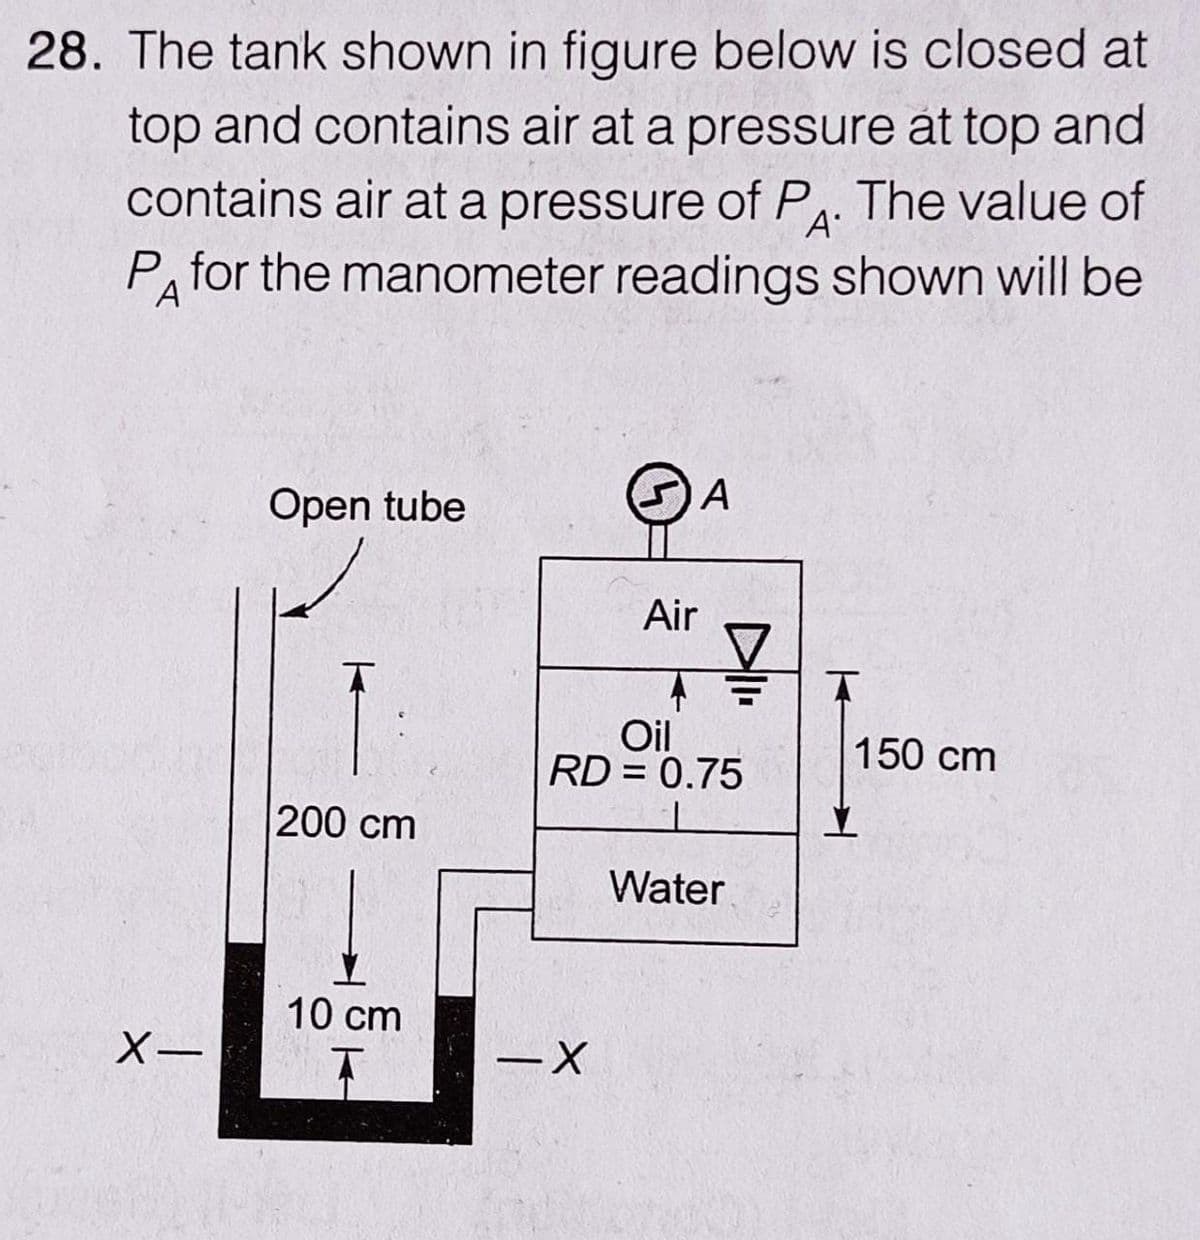 28. The tank shown in figure below is closed at
top and contains air at a pressure at top and
contains air at a pressure of P. The value of
Pfor the manometer readings shown will be
X-
Open tube
200 cm
10 cm
T
©
Air
- X
4
A
Oil
RD = 0.75
Water
T
150 cm